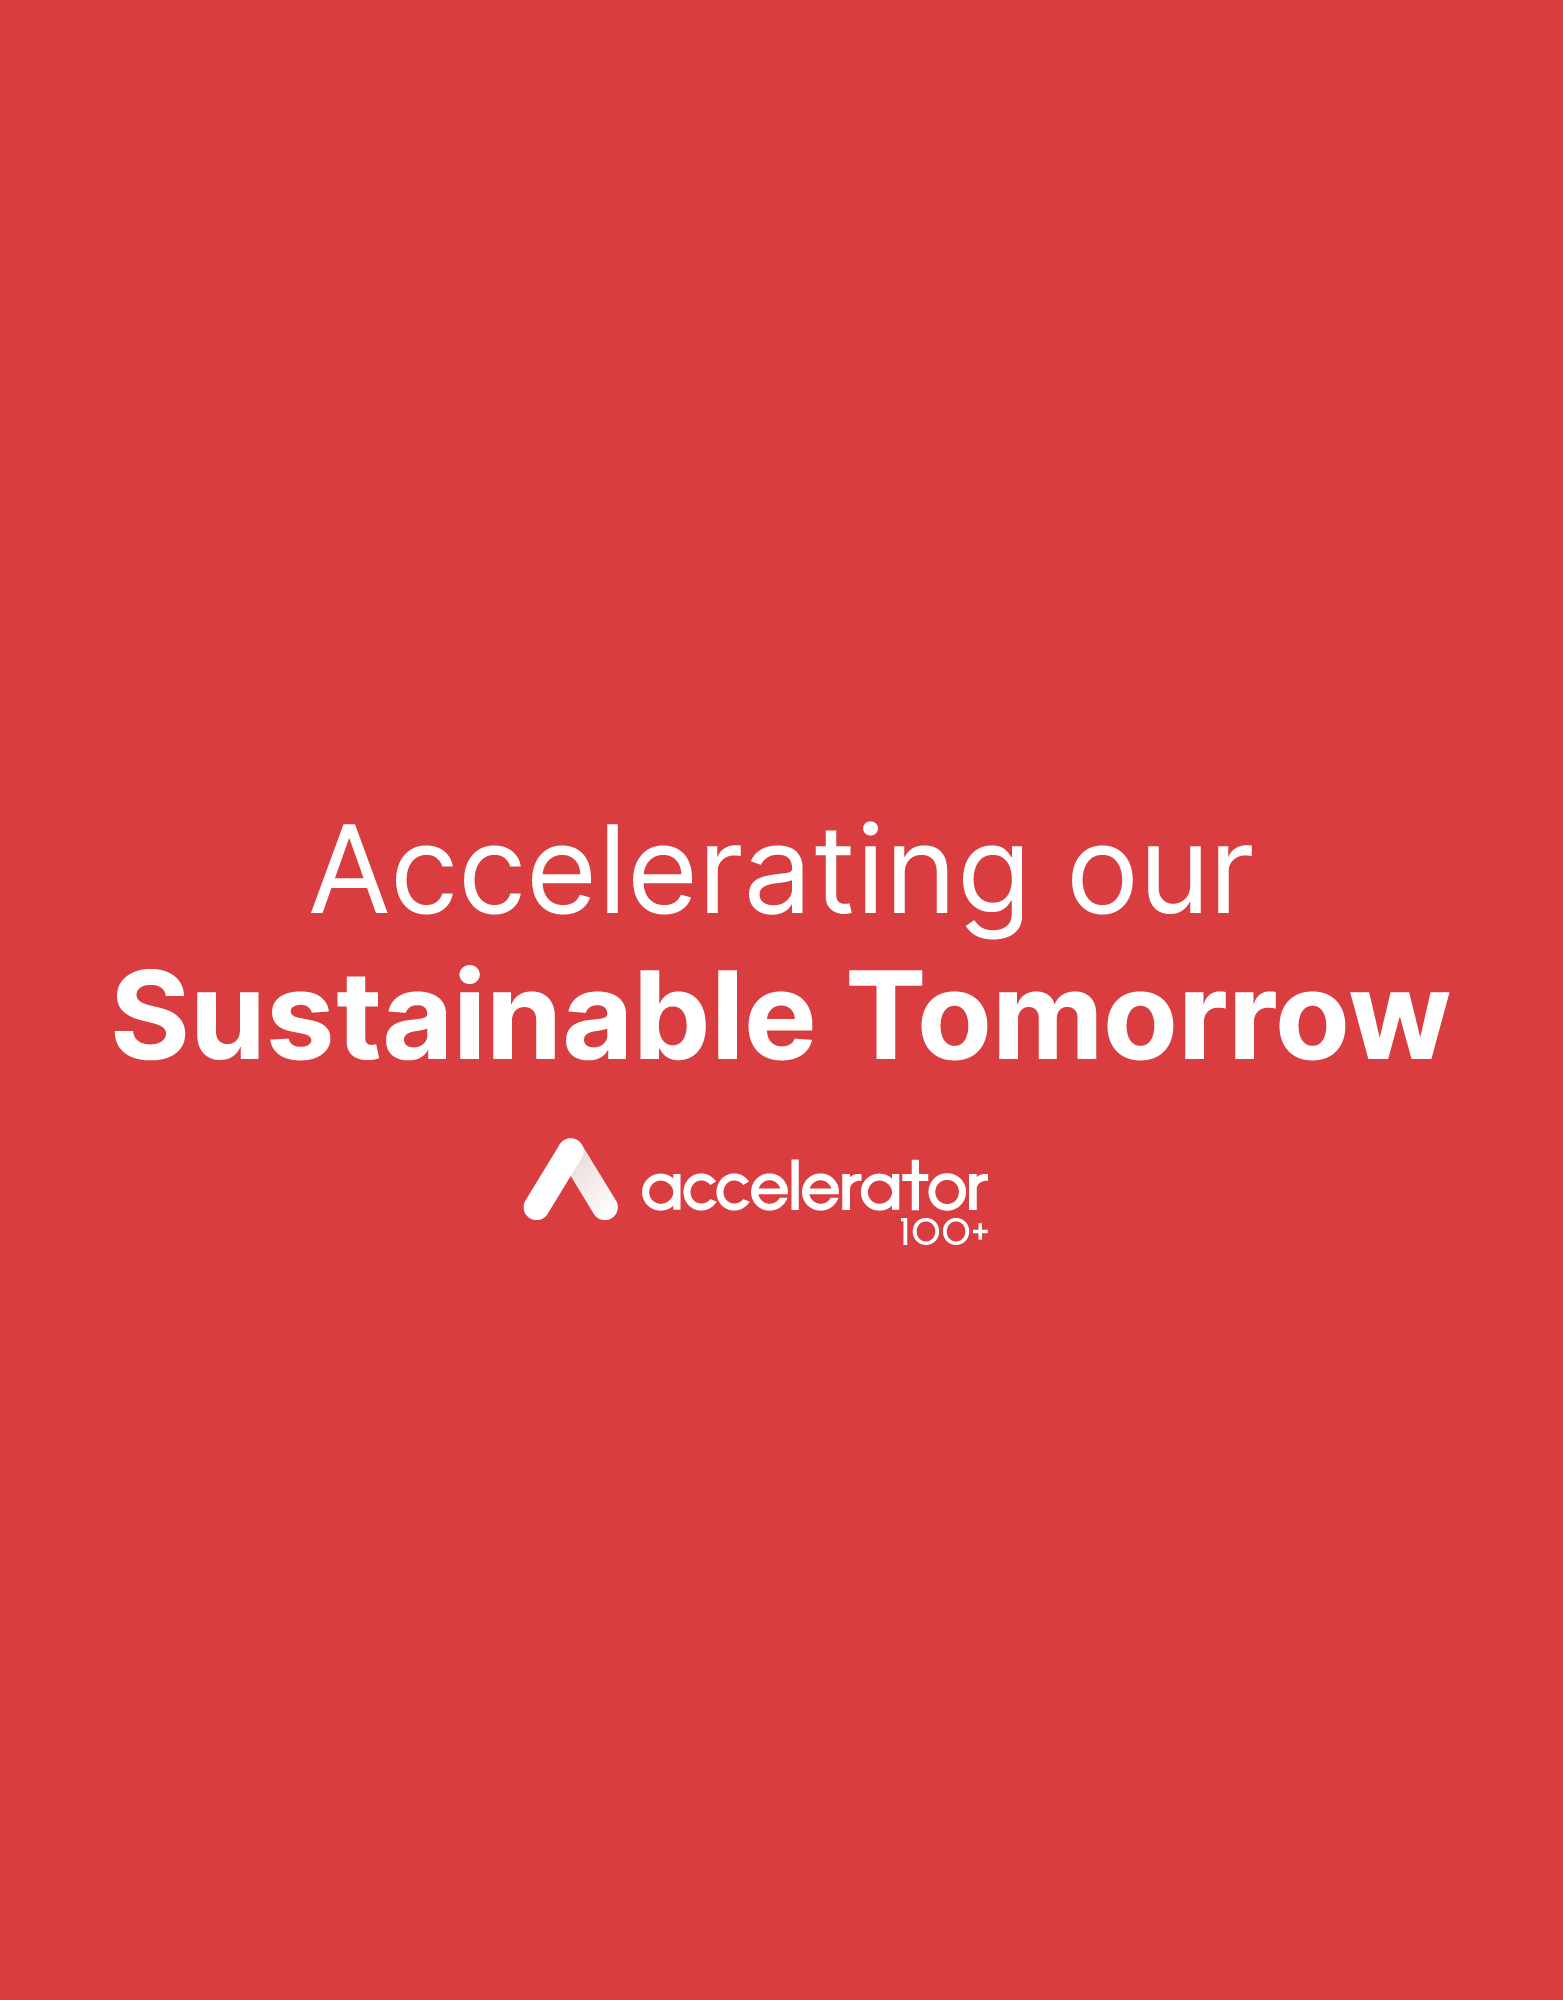 Accelerating Our Sustainable Tomorrow